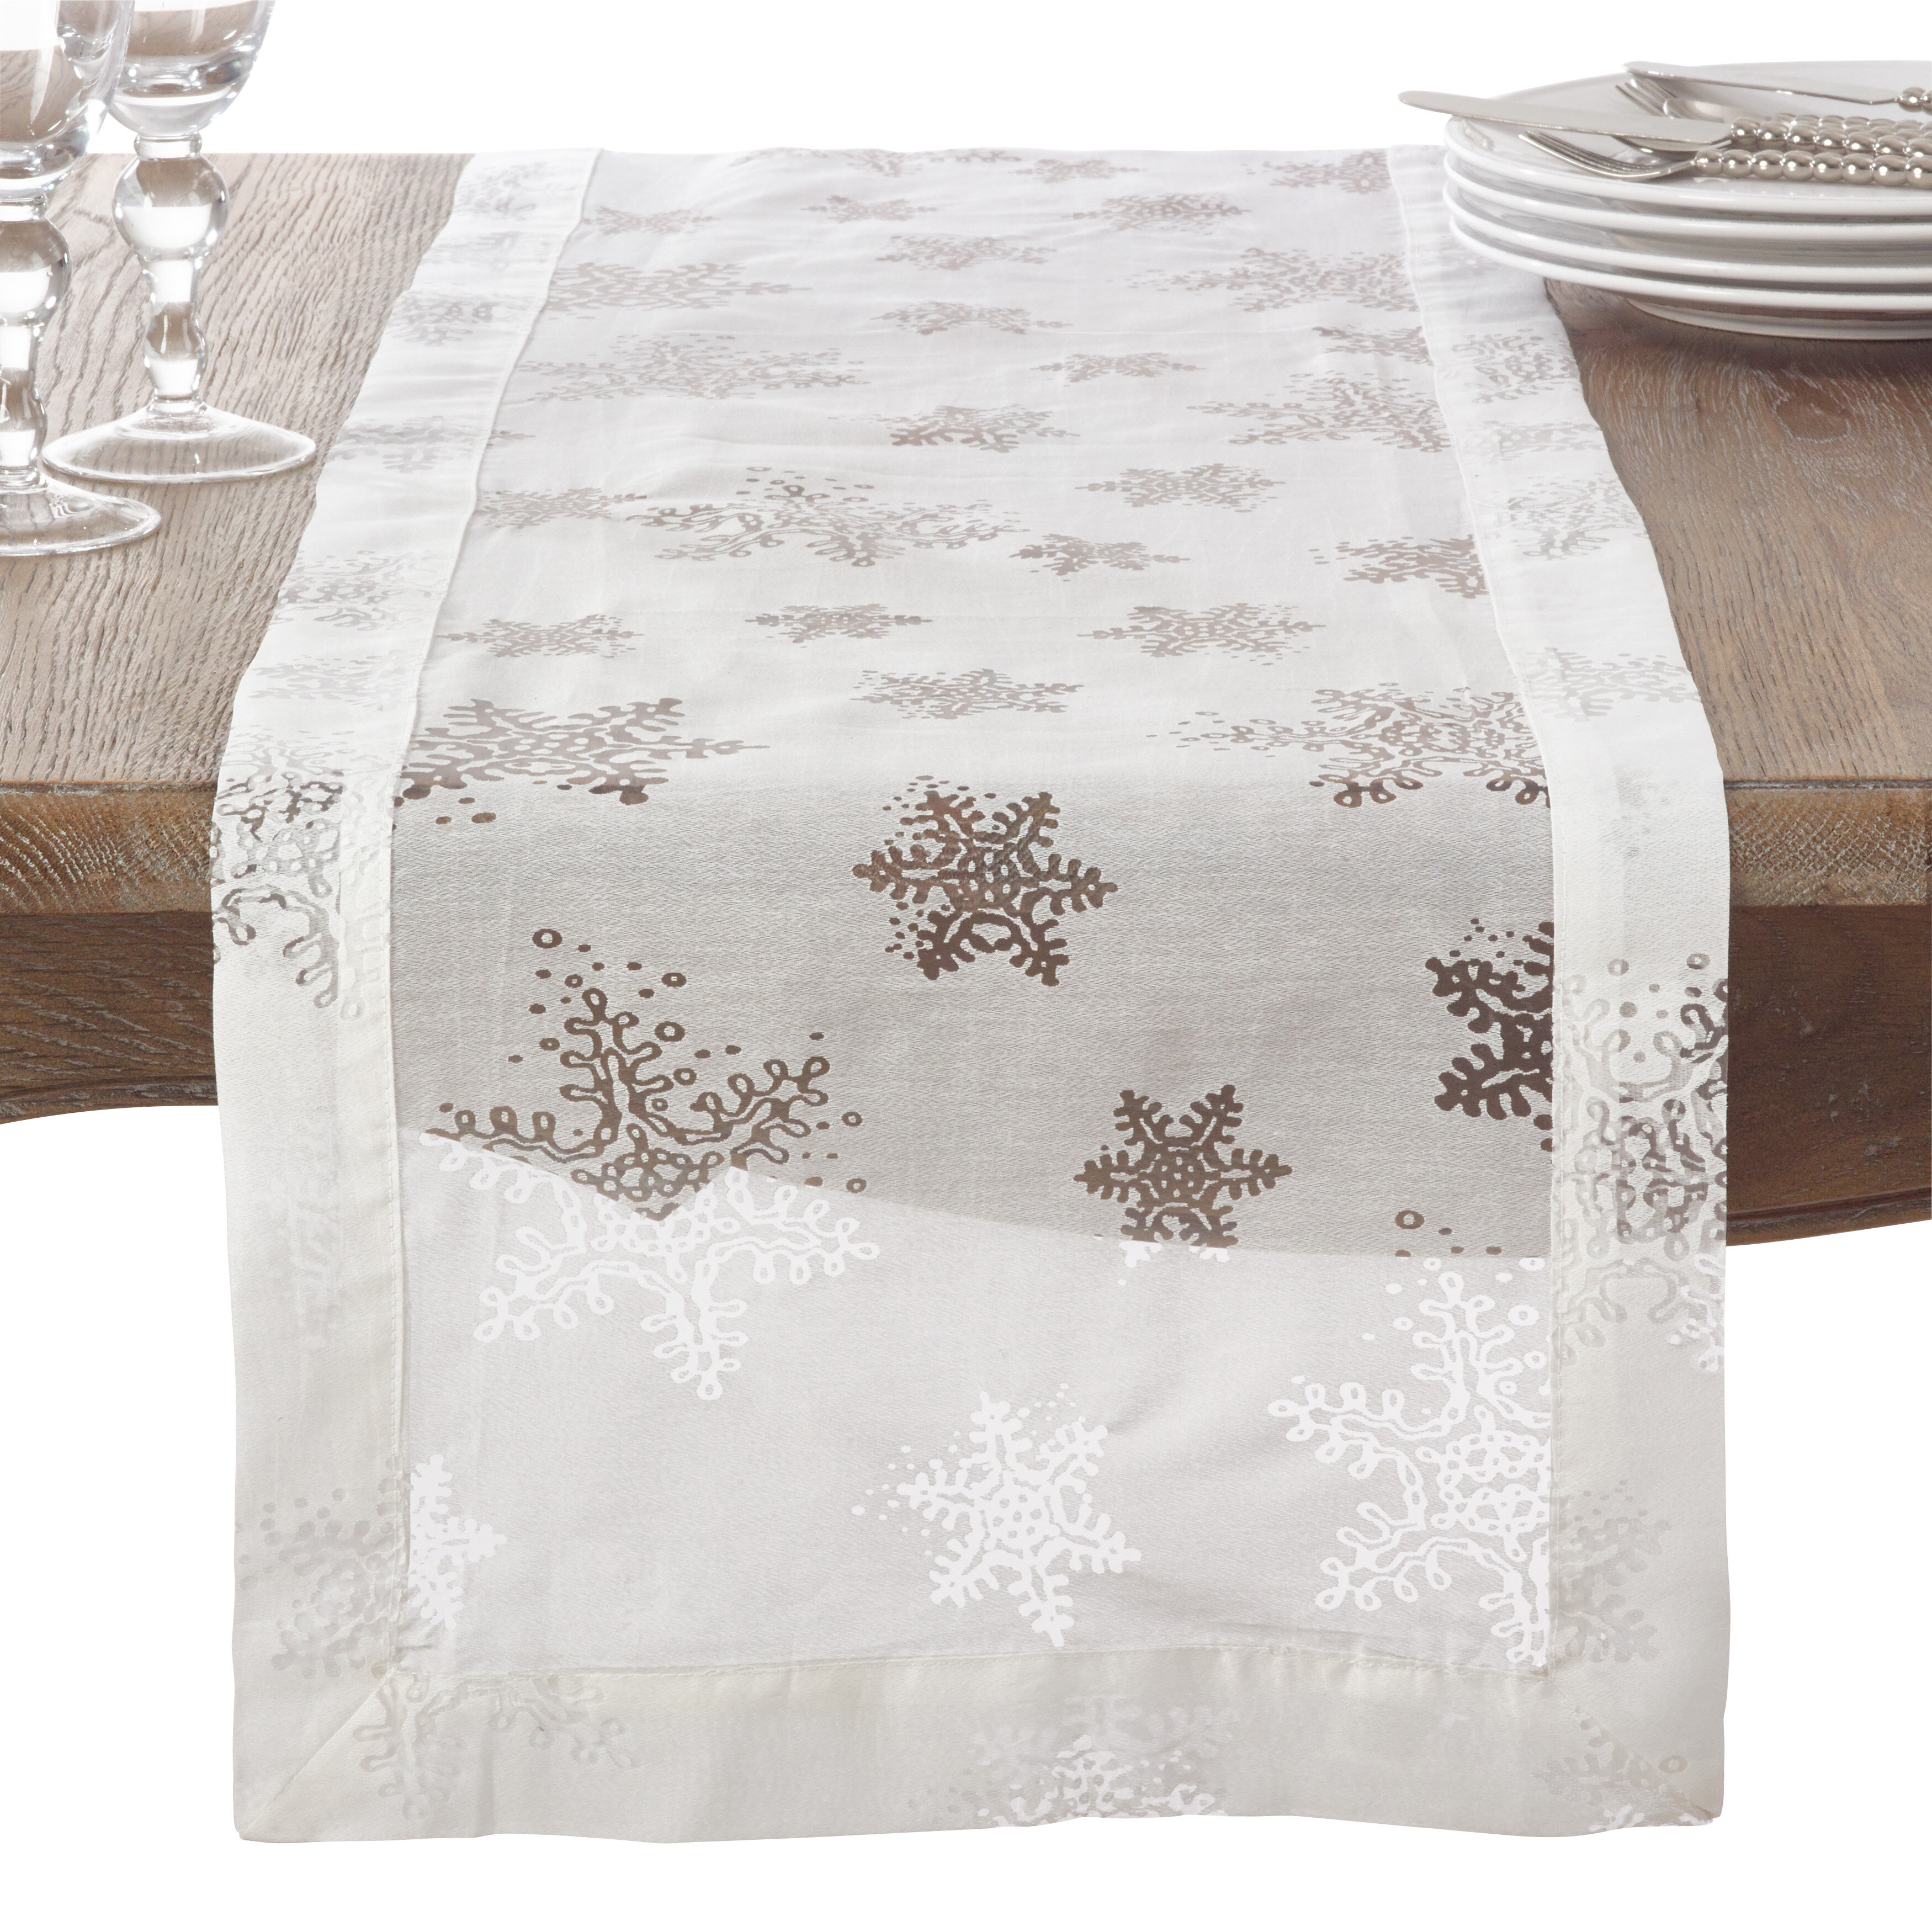 The Holiday Aisle Rael Burnout Snowflake Design Table Runner